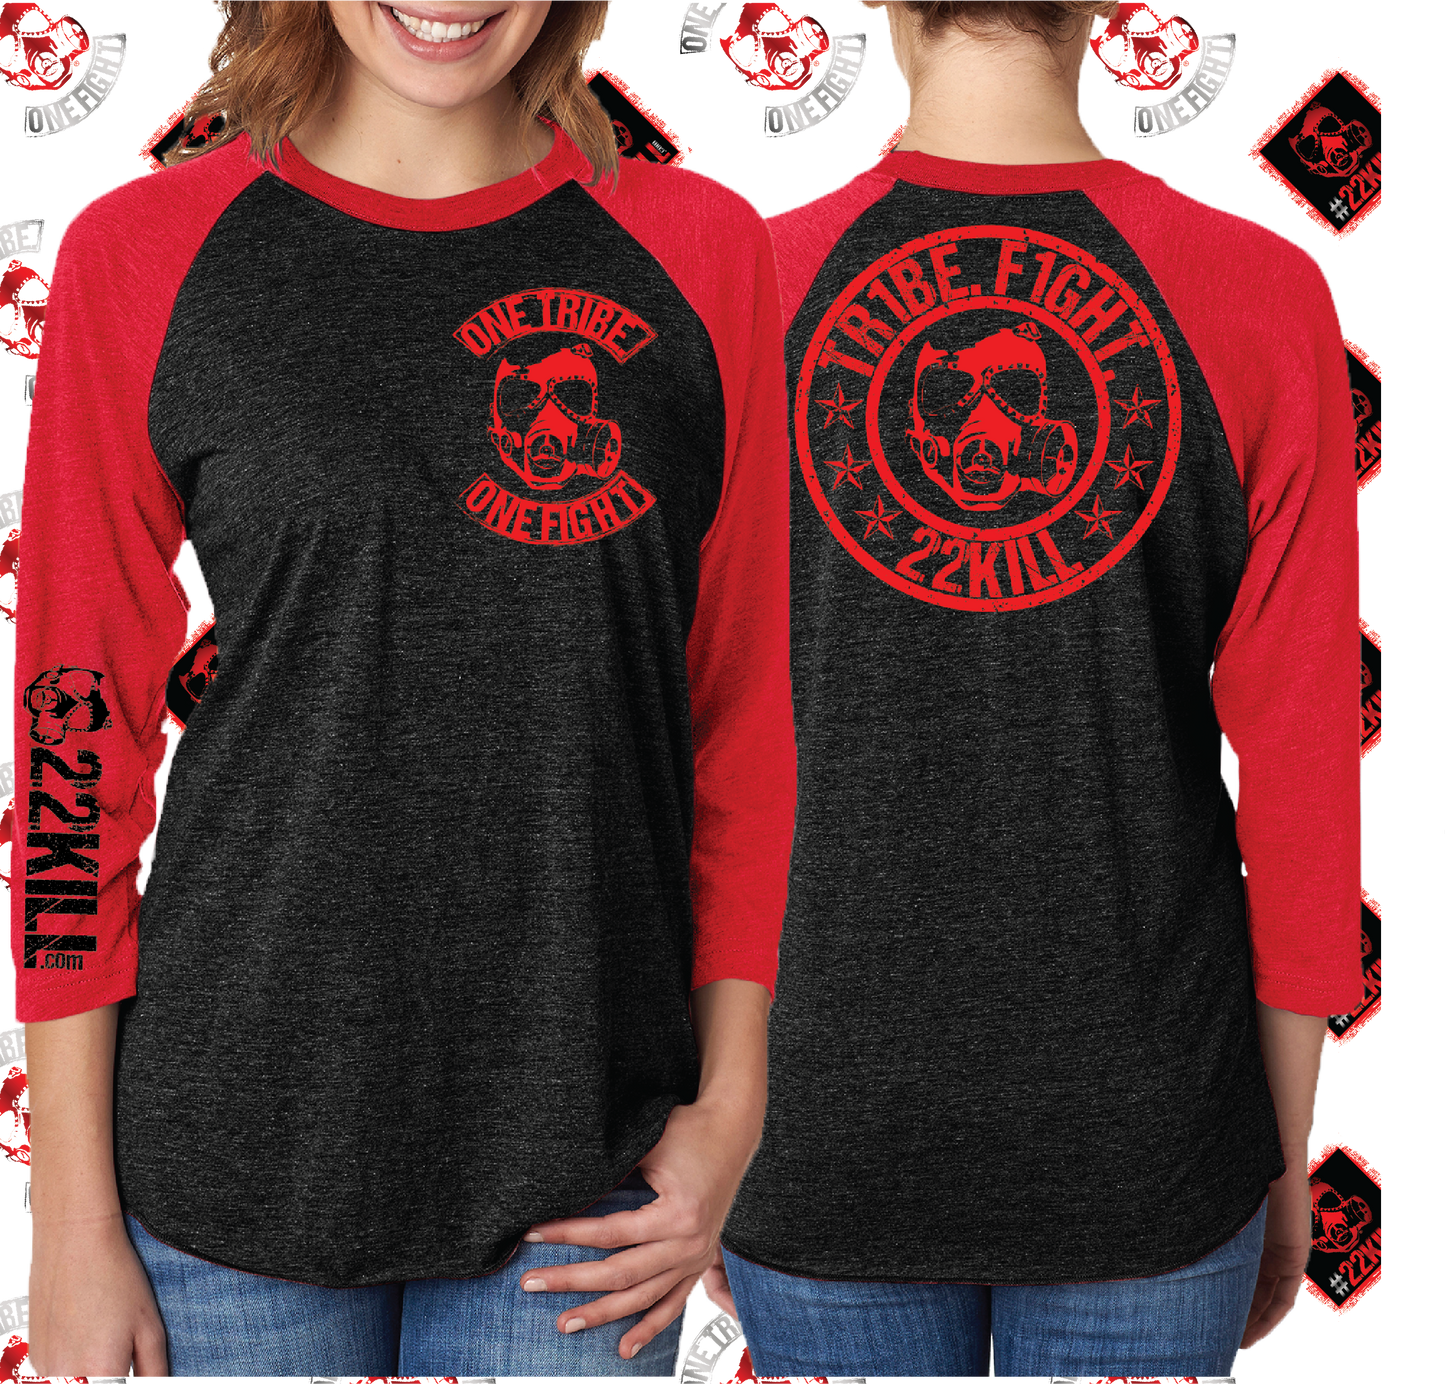 22KILL Baseball tee in black and red. One Tribe. One Fight.